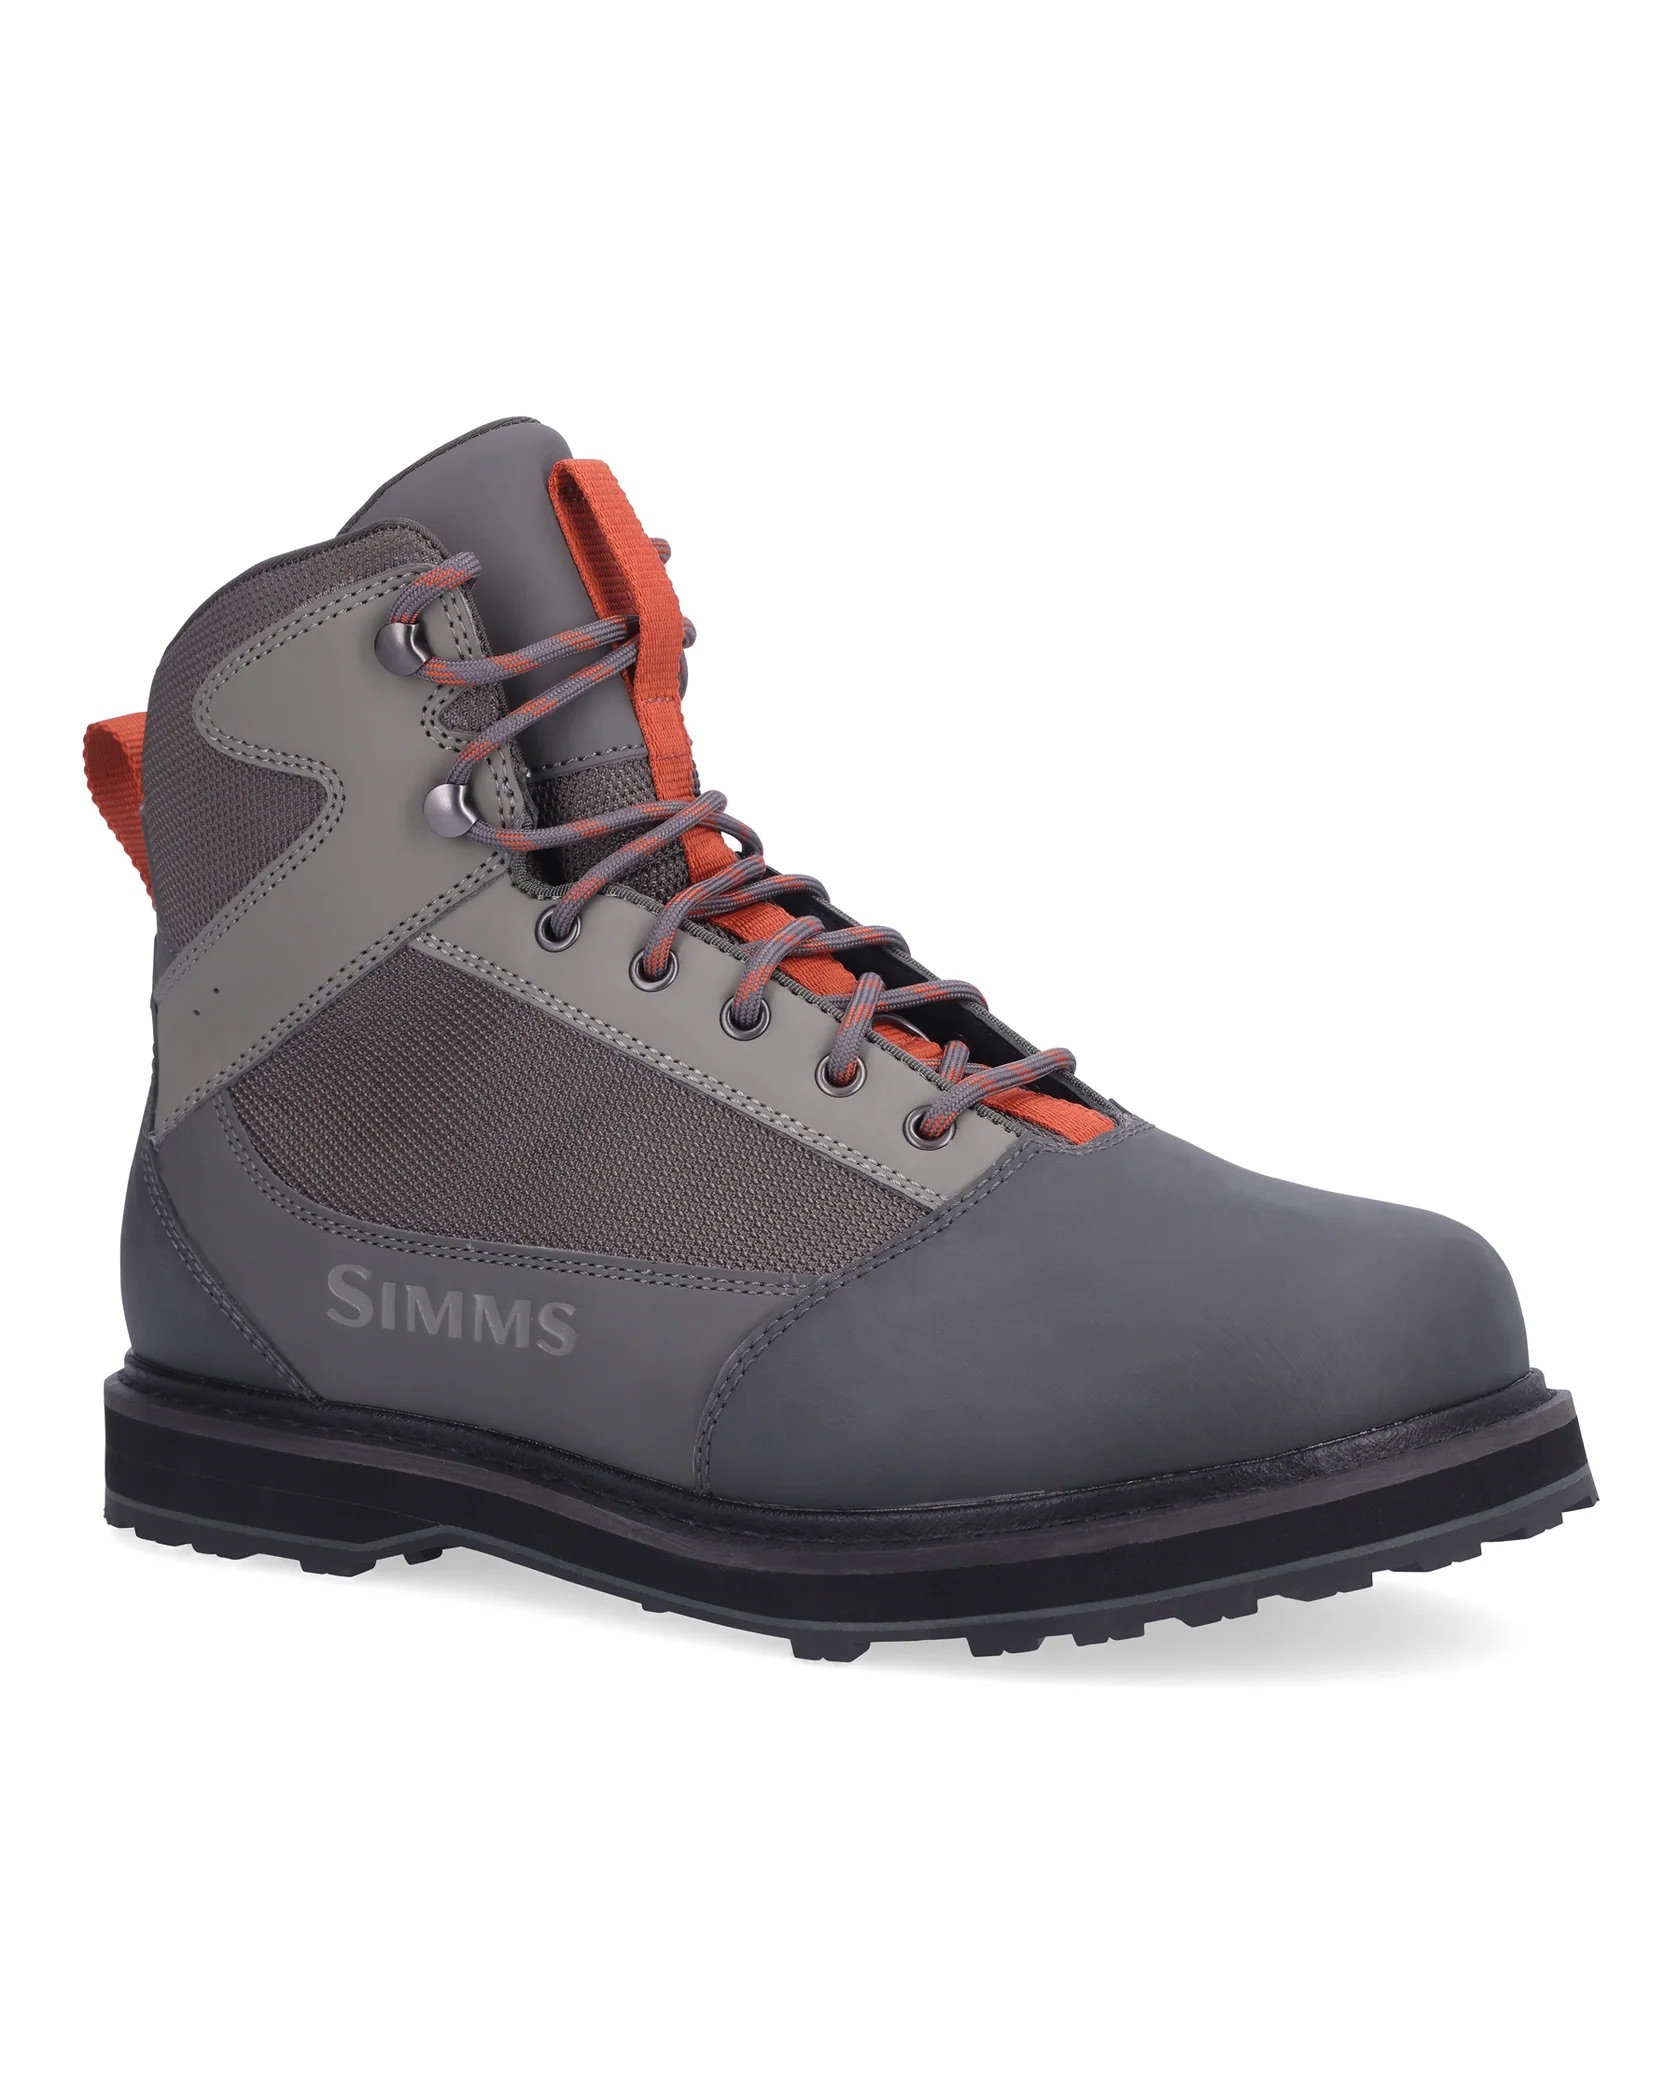 Simms Tributary Wading Boot - Rubber - Size 14